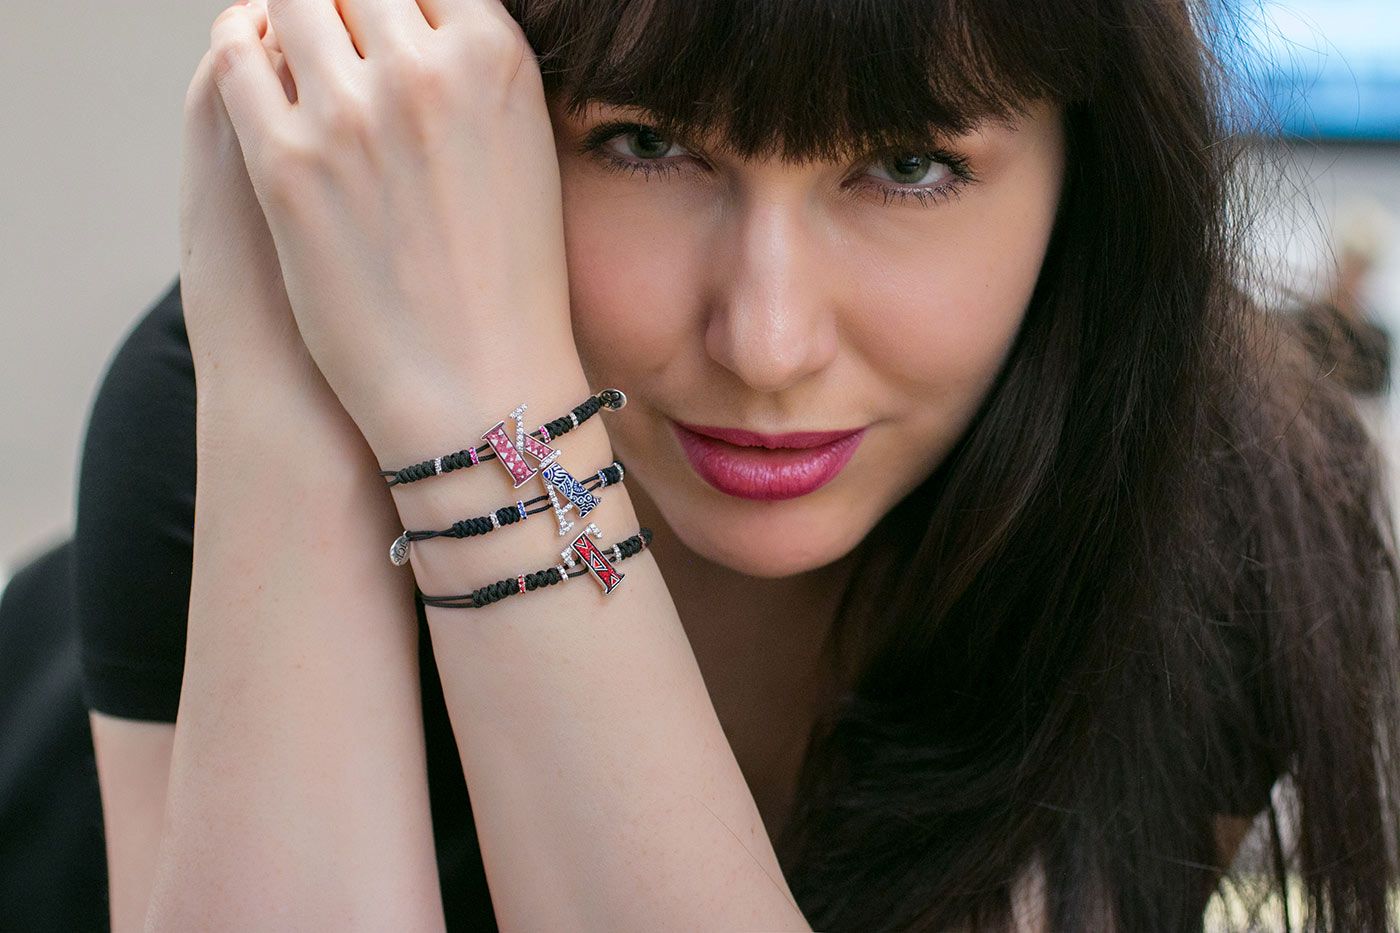 Katerina Perez wears bracelets from the SICIS Alphabet collection